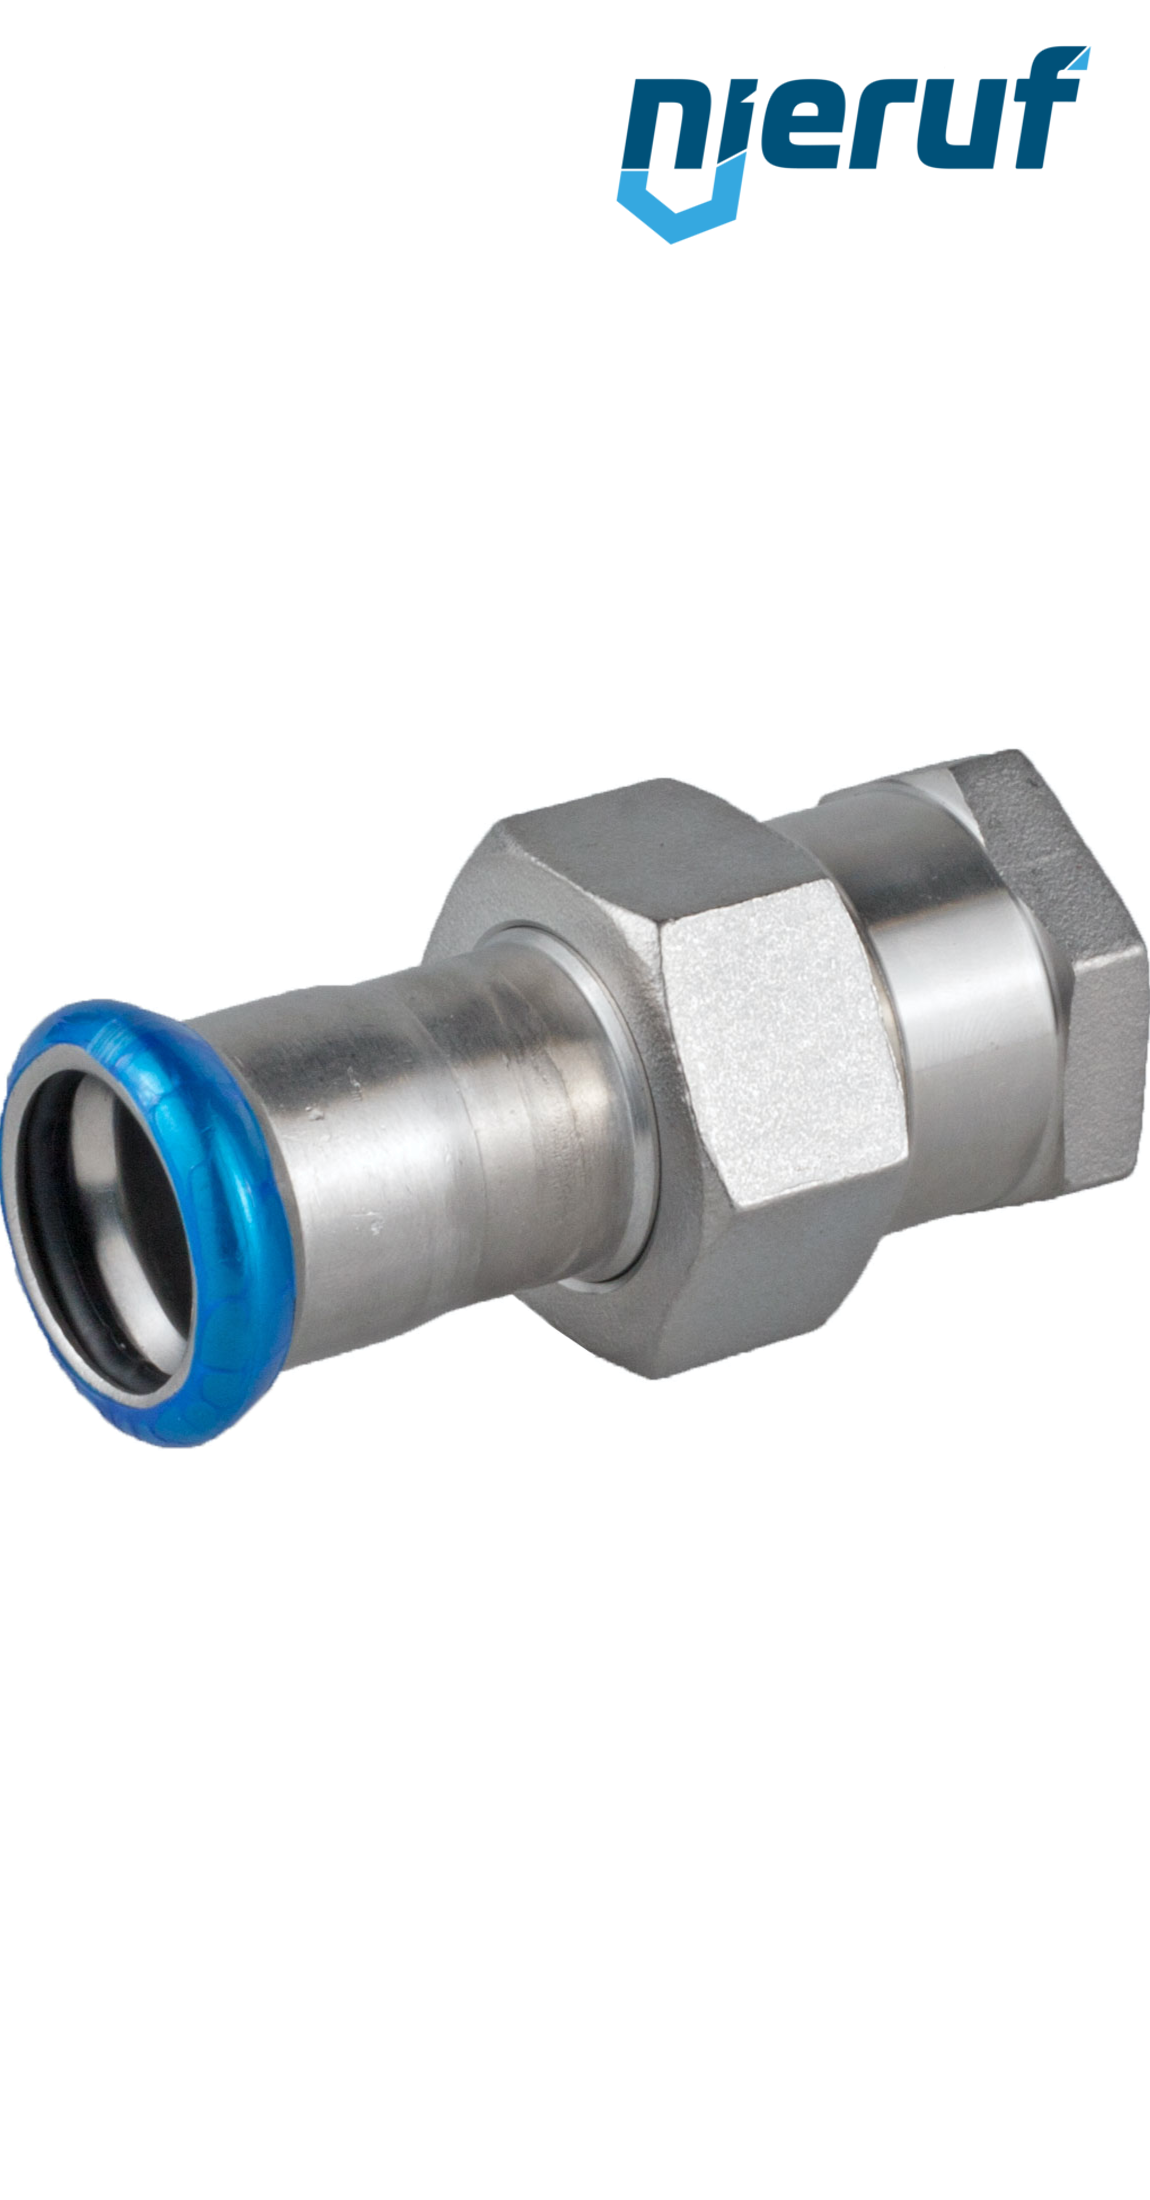 Union Coupling Pressfitting F DN40 - 42,0 mm female thread 1 1/2" inch stainless steel